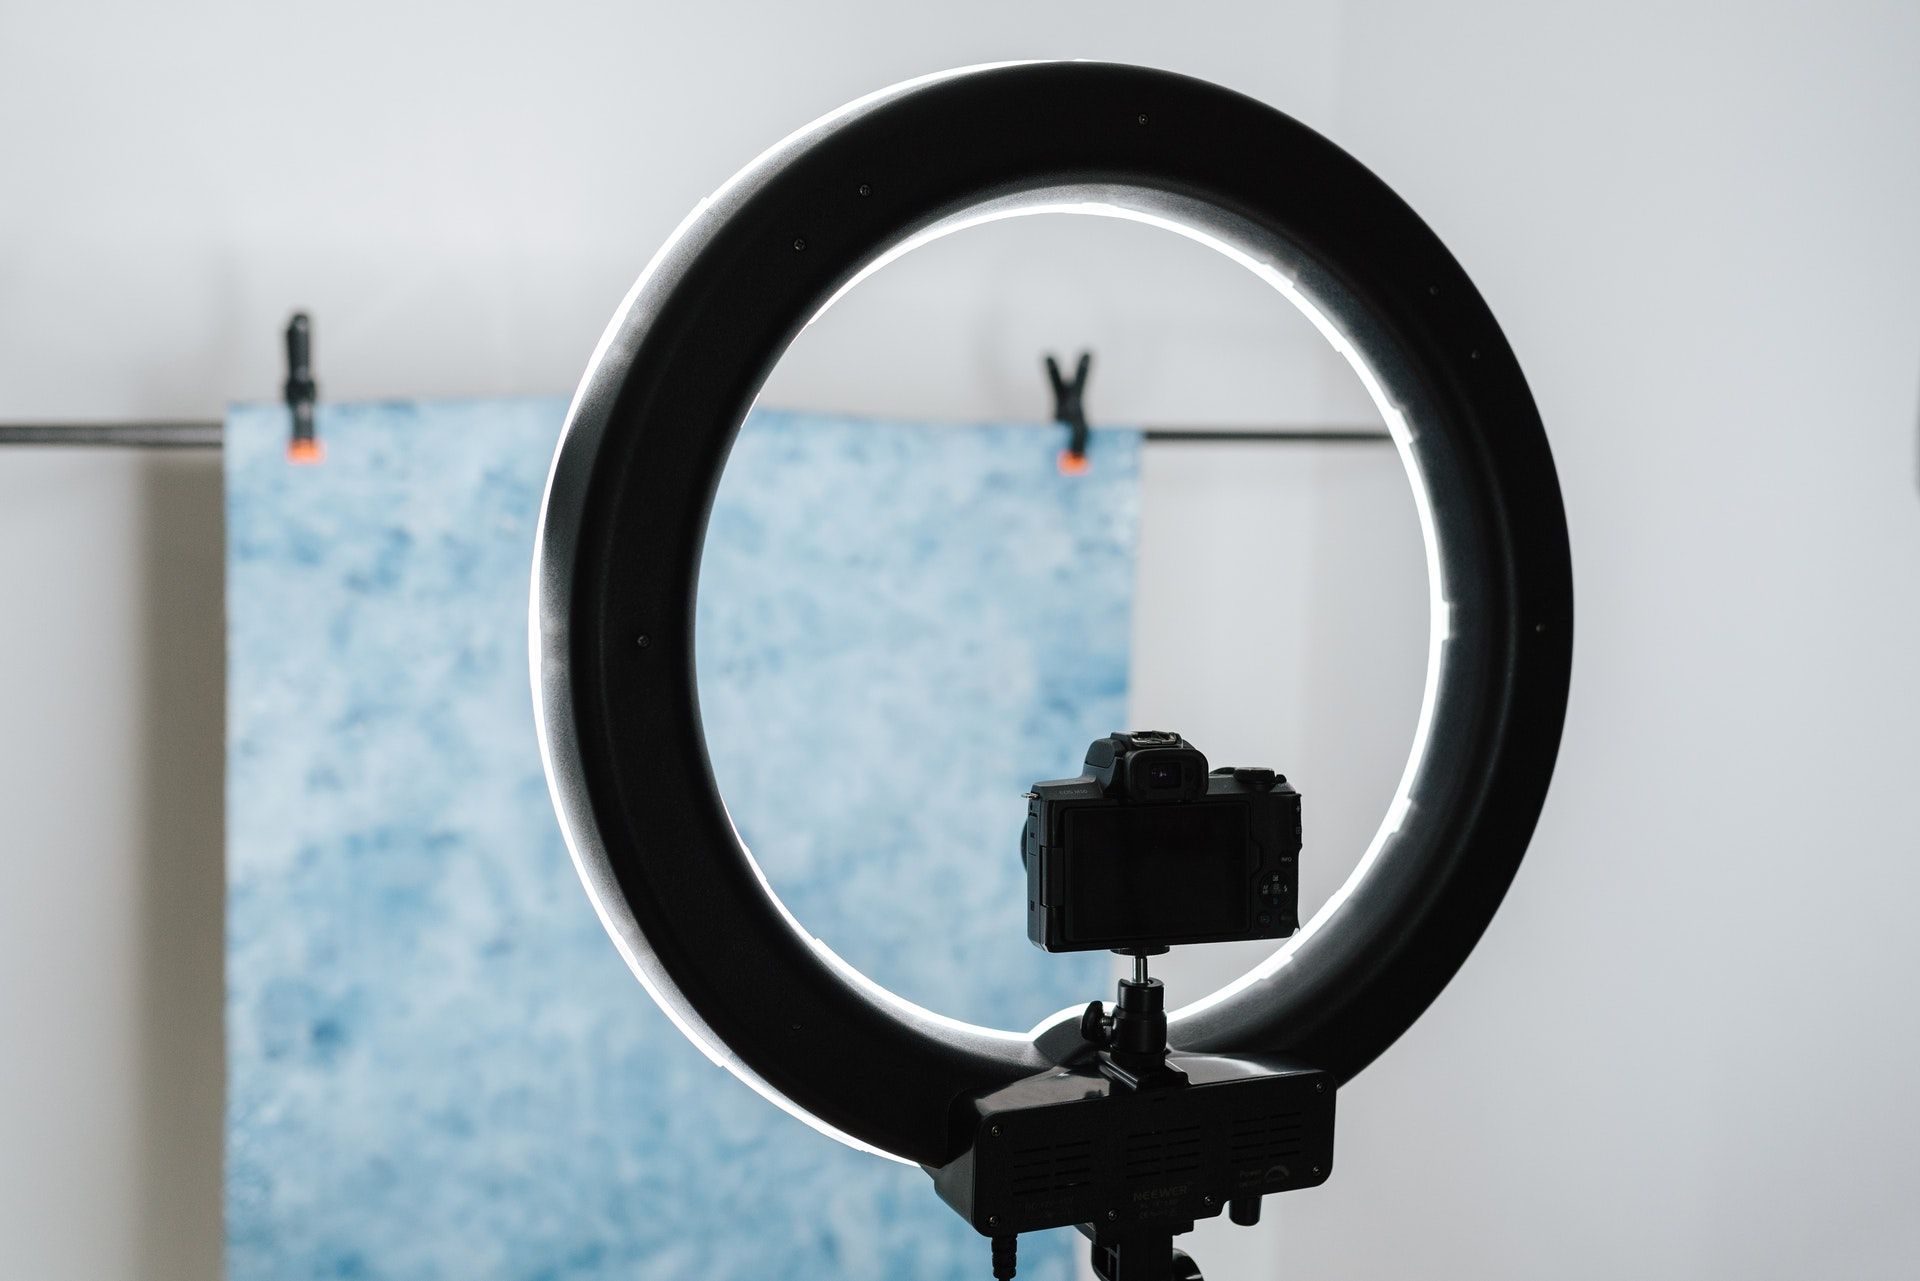 A tripod with a ring light